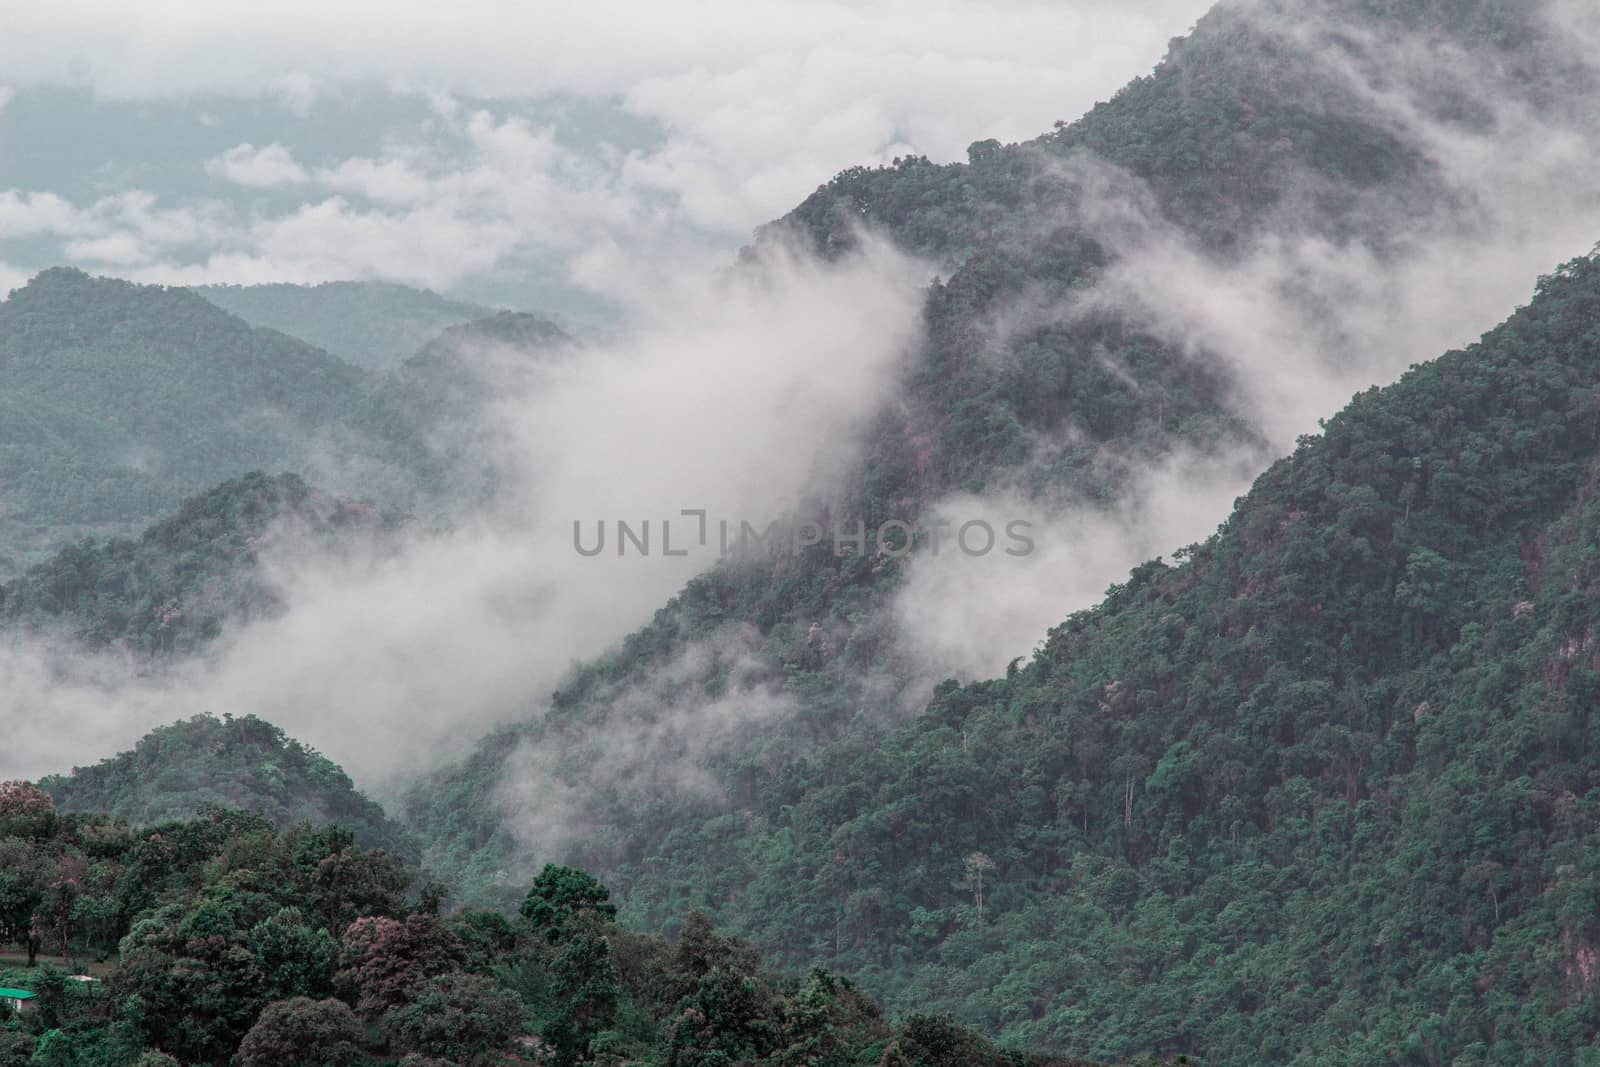 Landscape of complex mountain with fog in northern of Thailand.